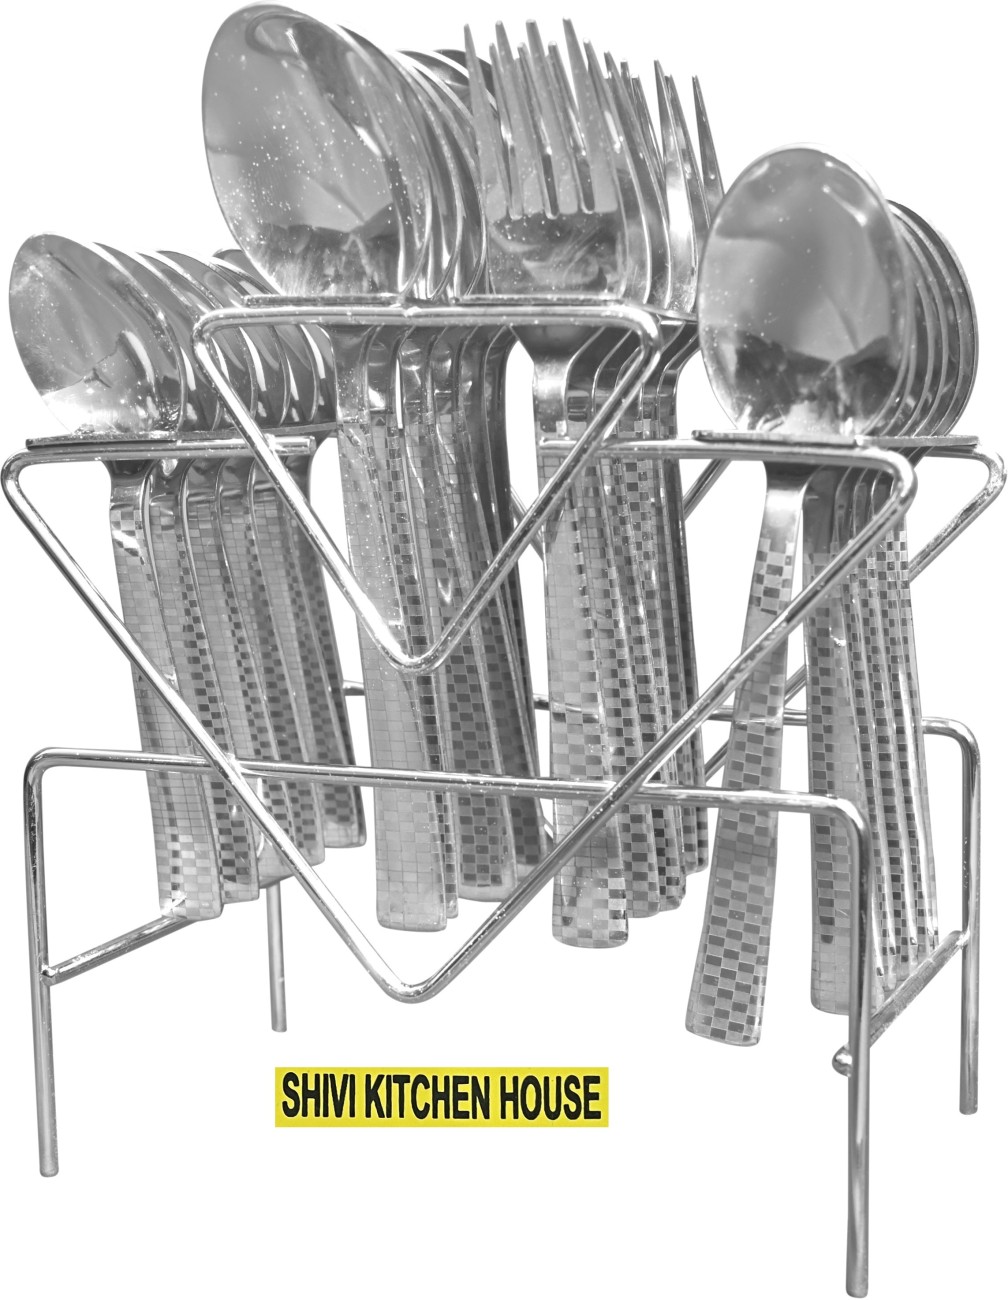 VRACKART Stainless Steel Kitchen Storage Utensil Cup Stand For